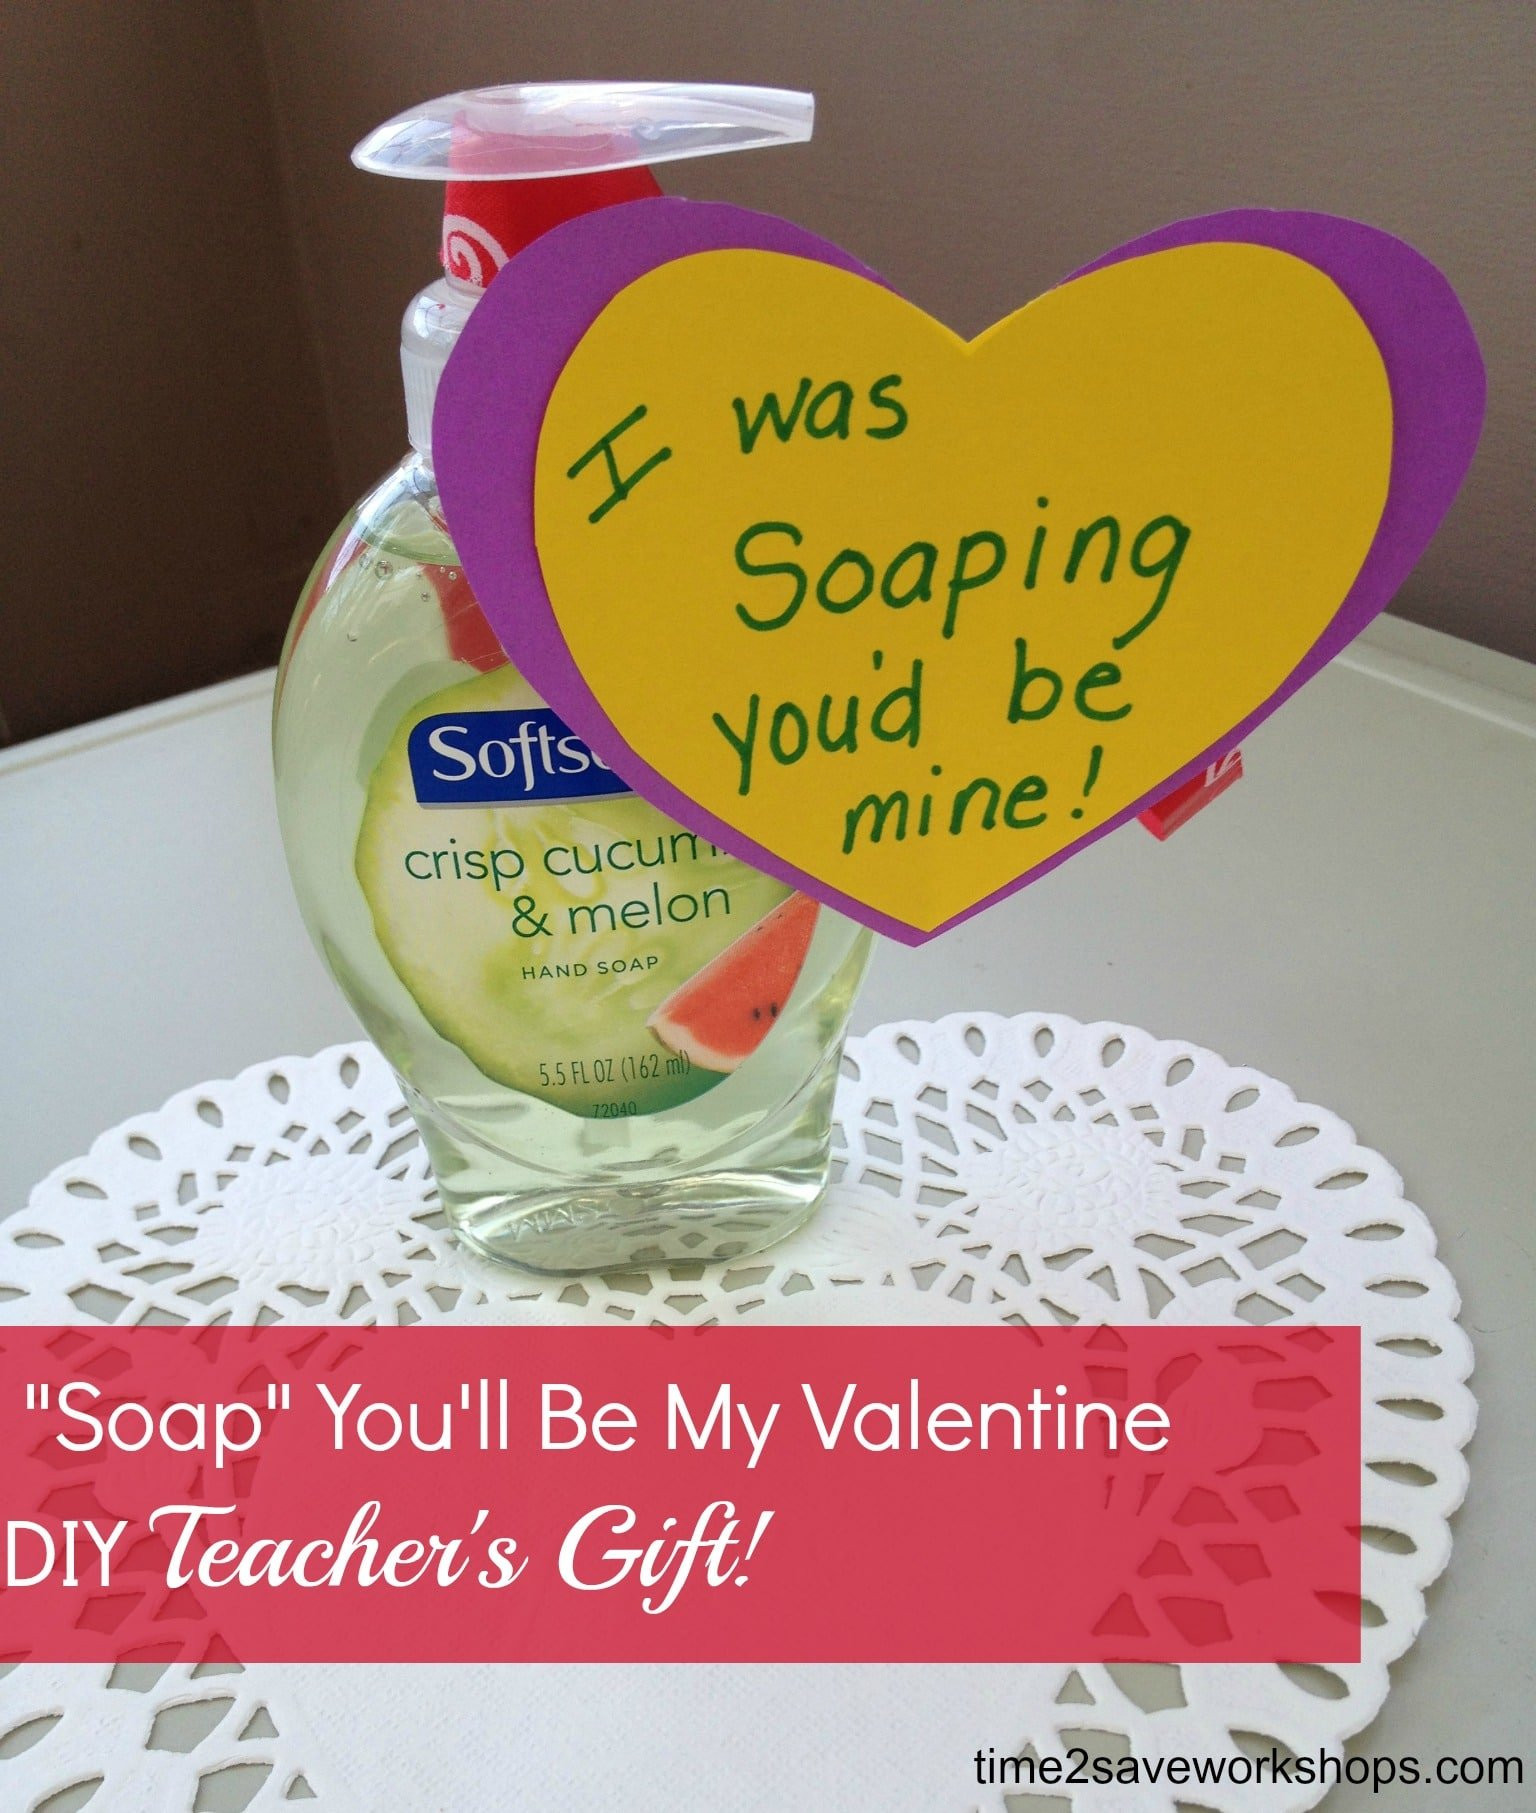 Will You Be My Valentine Gift Ideas
 Homemade Valentine Gifts "Soap" You ll Be My Valentine